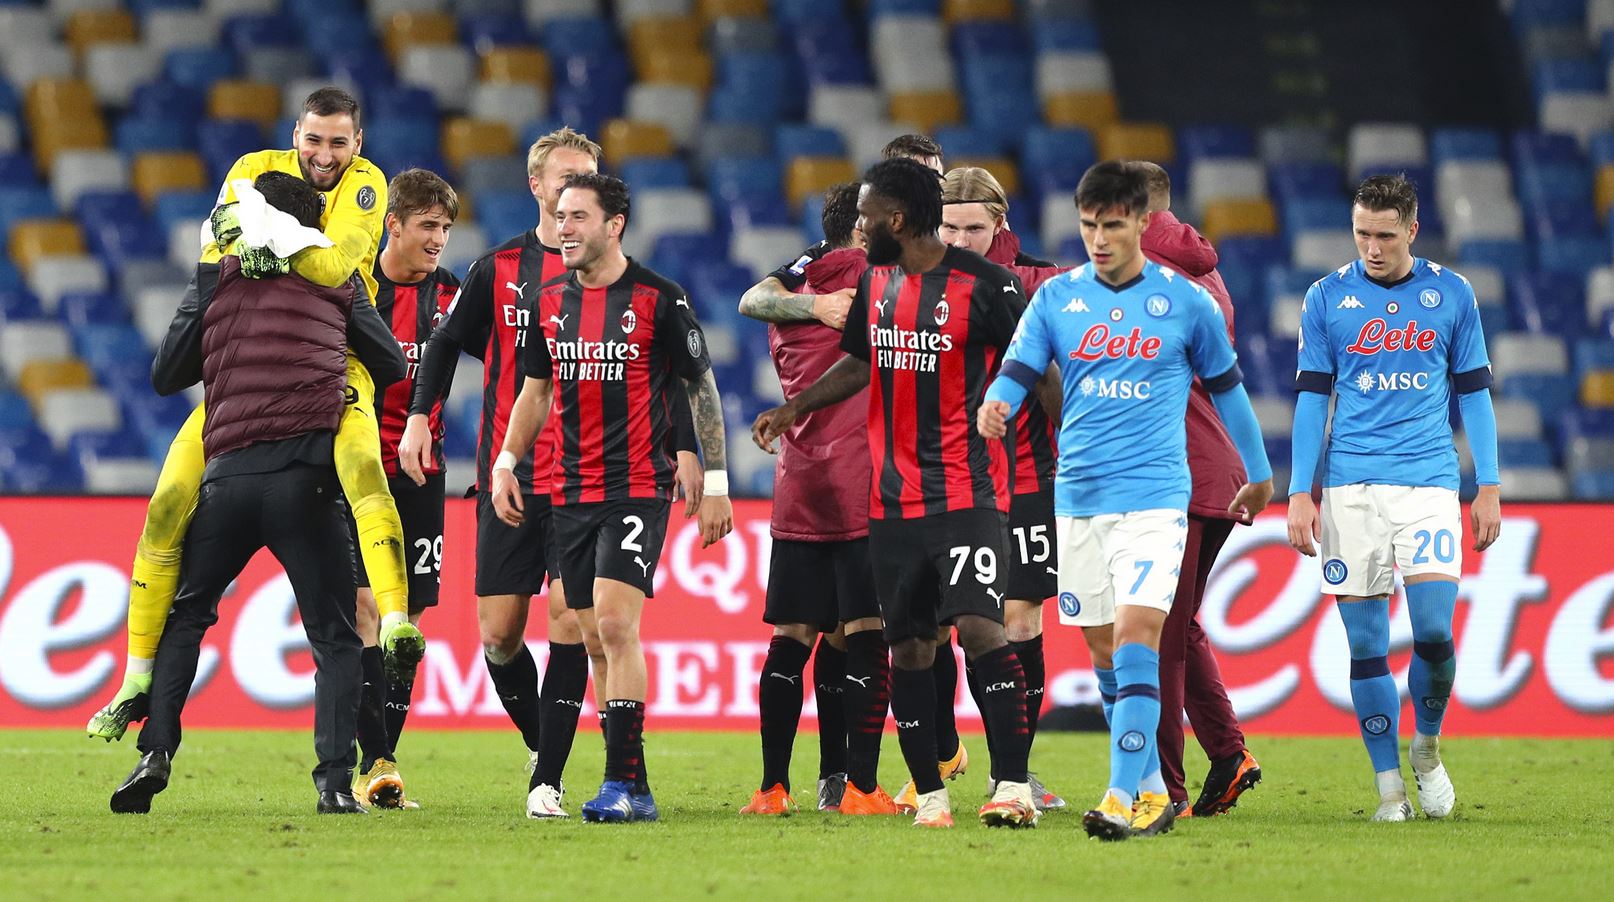 This tactical analysis will break down the key playing patters that had an impact on the final match outcome as Milan beat Napoli 2-1 at the San Paolo